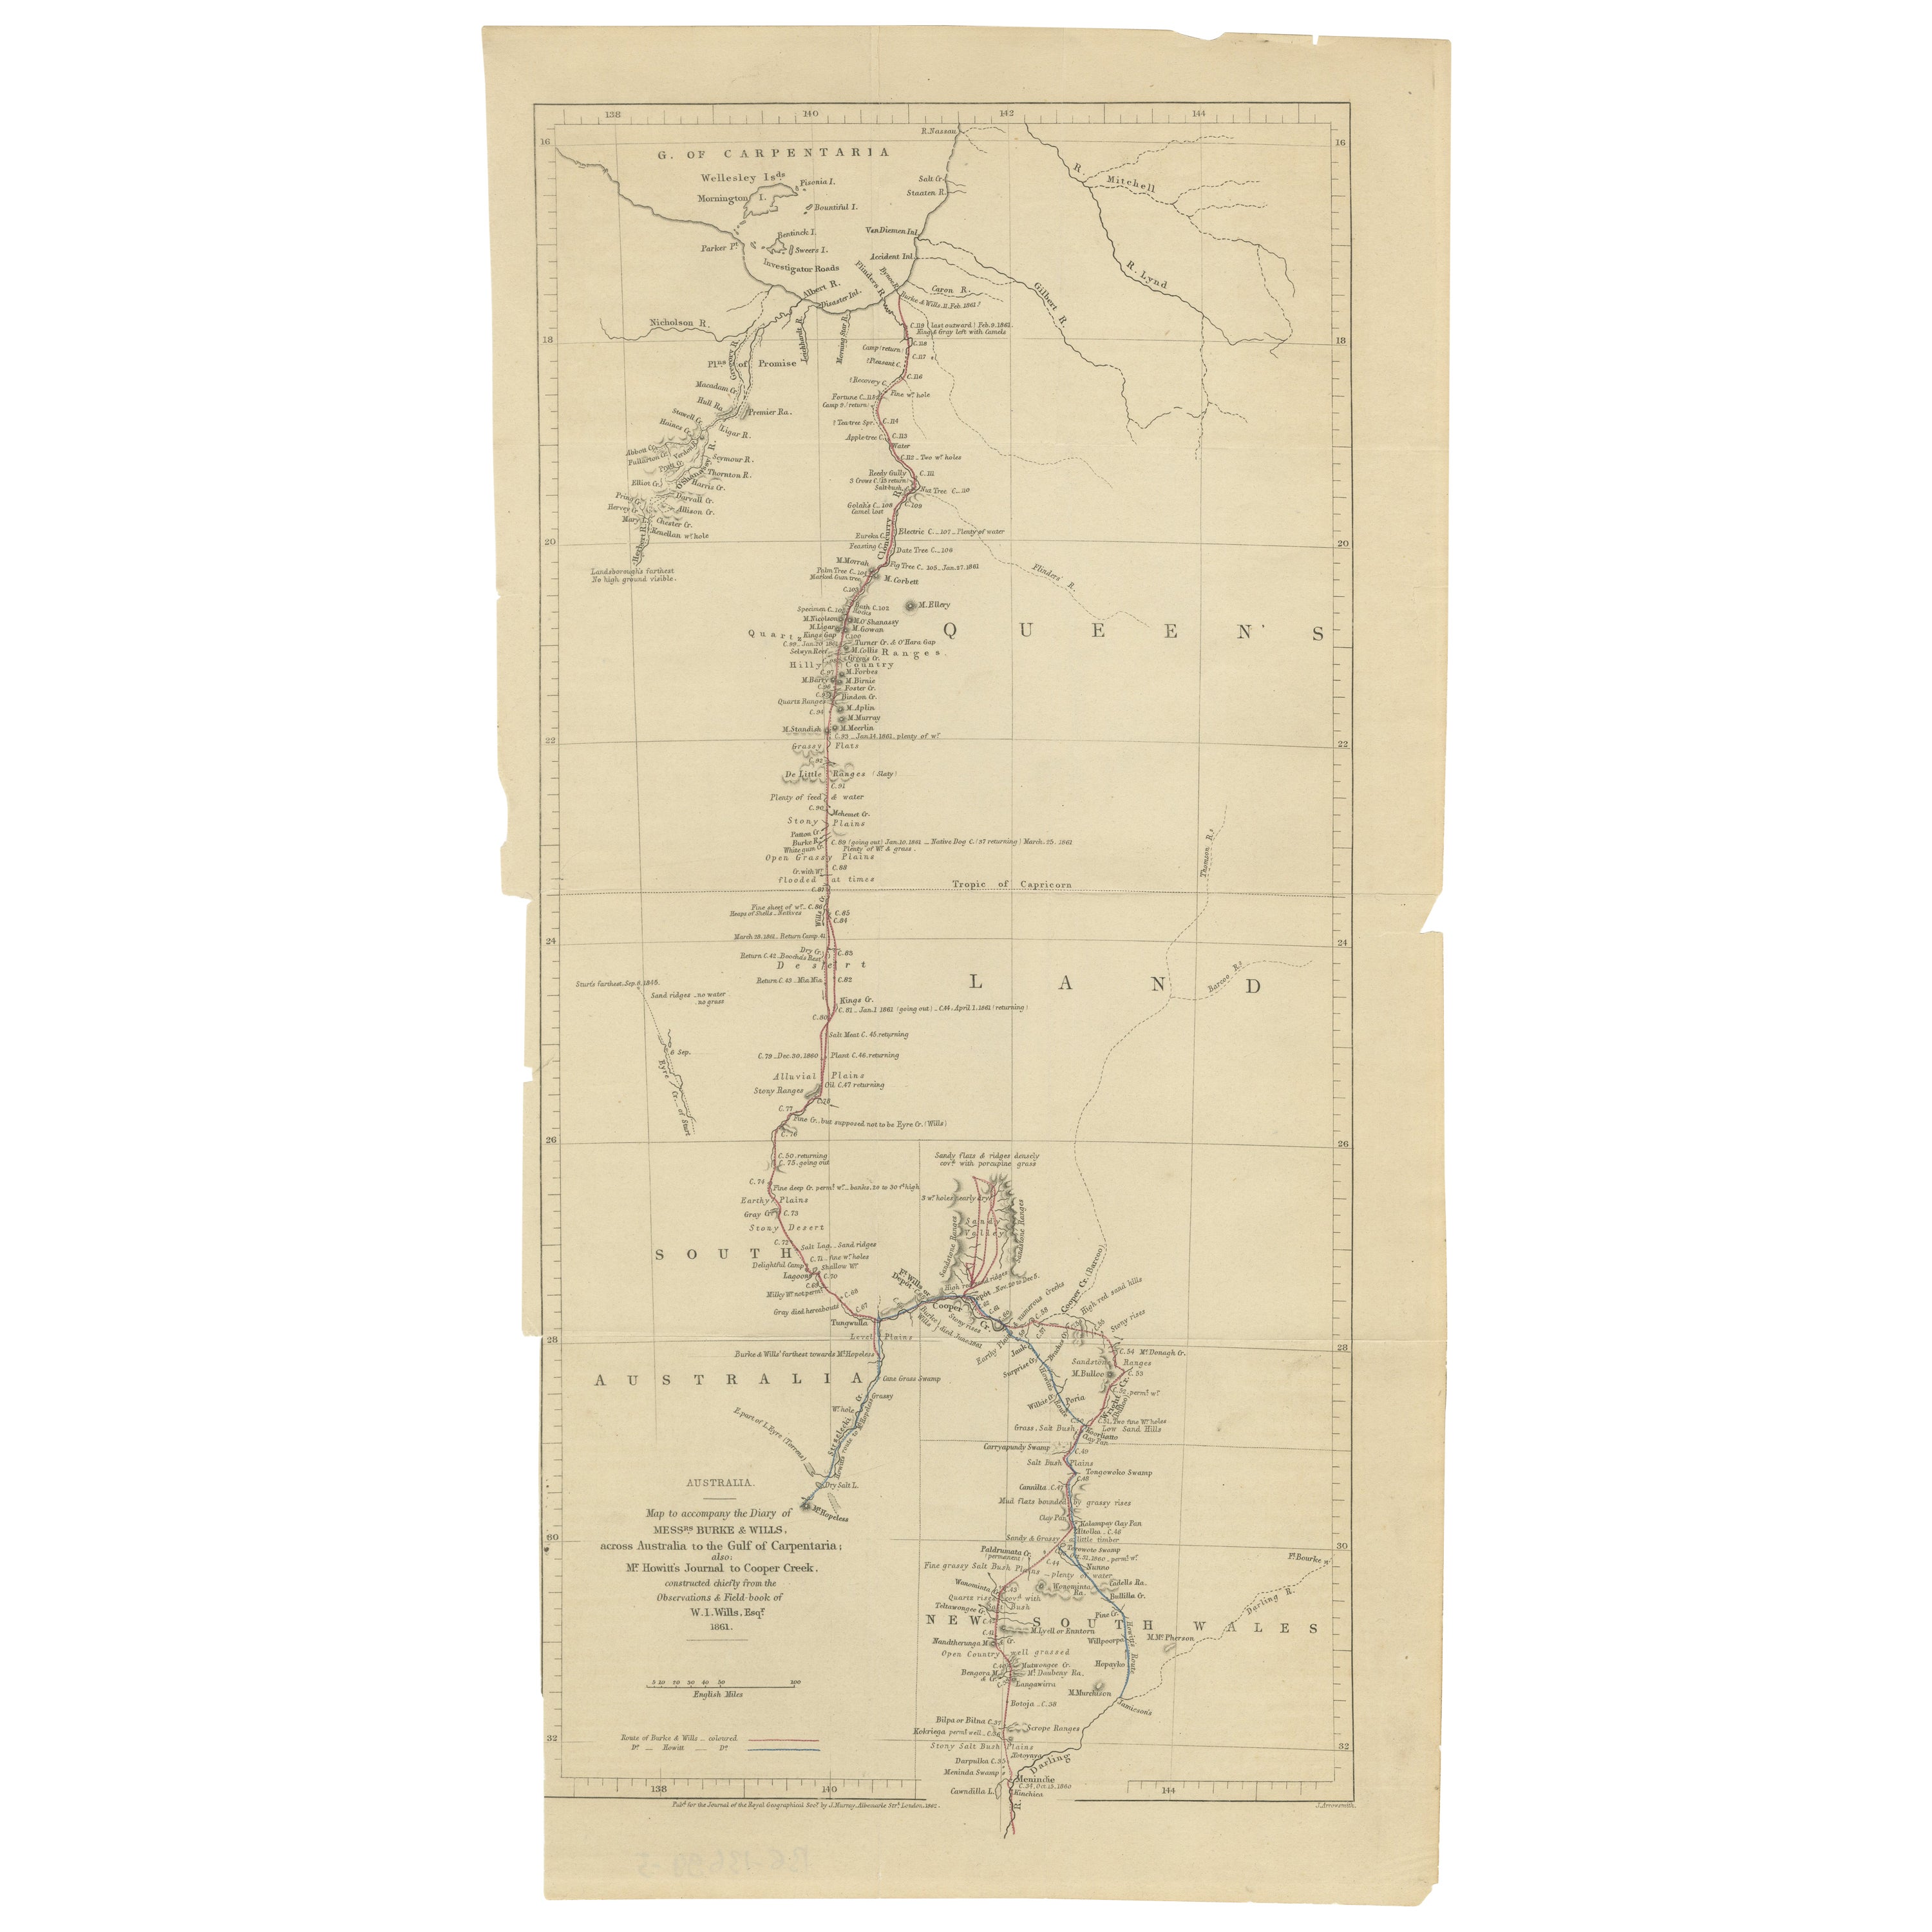 The Fateful Track of The Burke and Wills Expedition in Australia's Outback, 1862